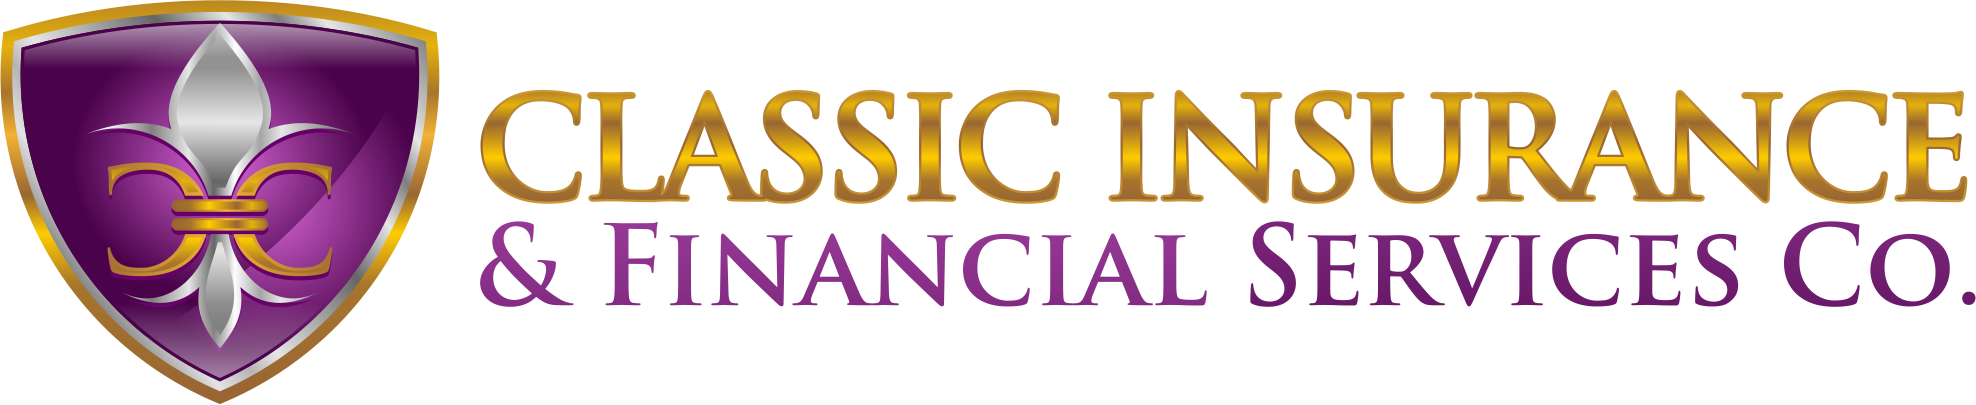 Classic Insurance & Financial Services